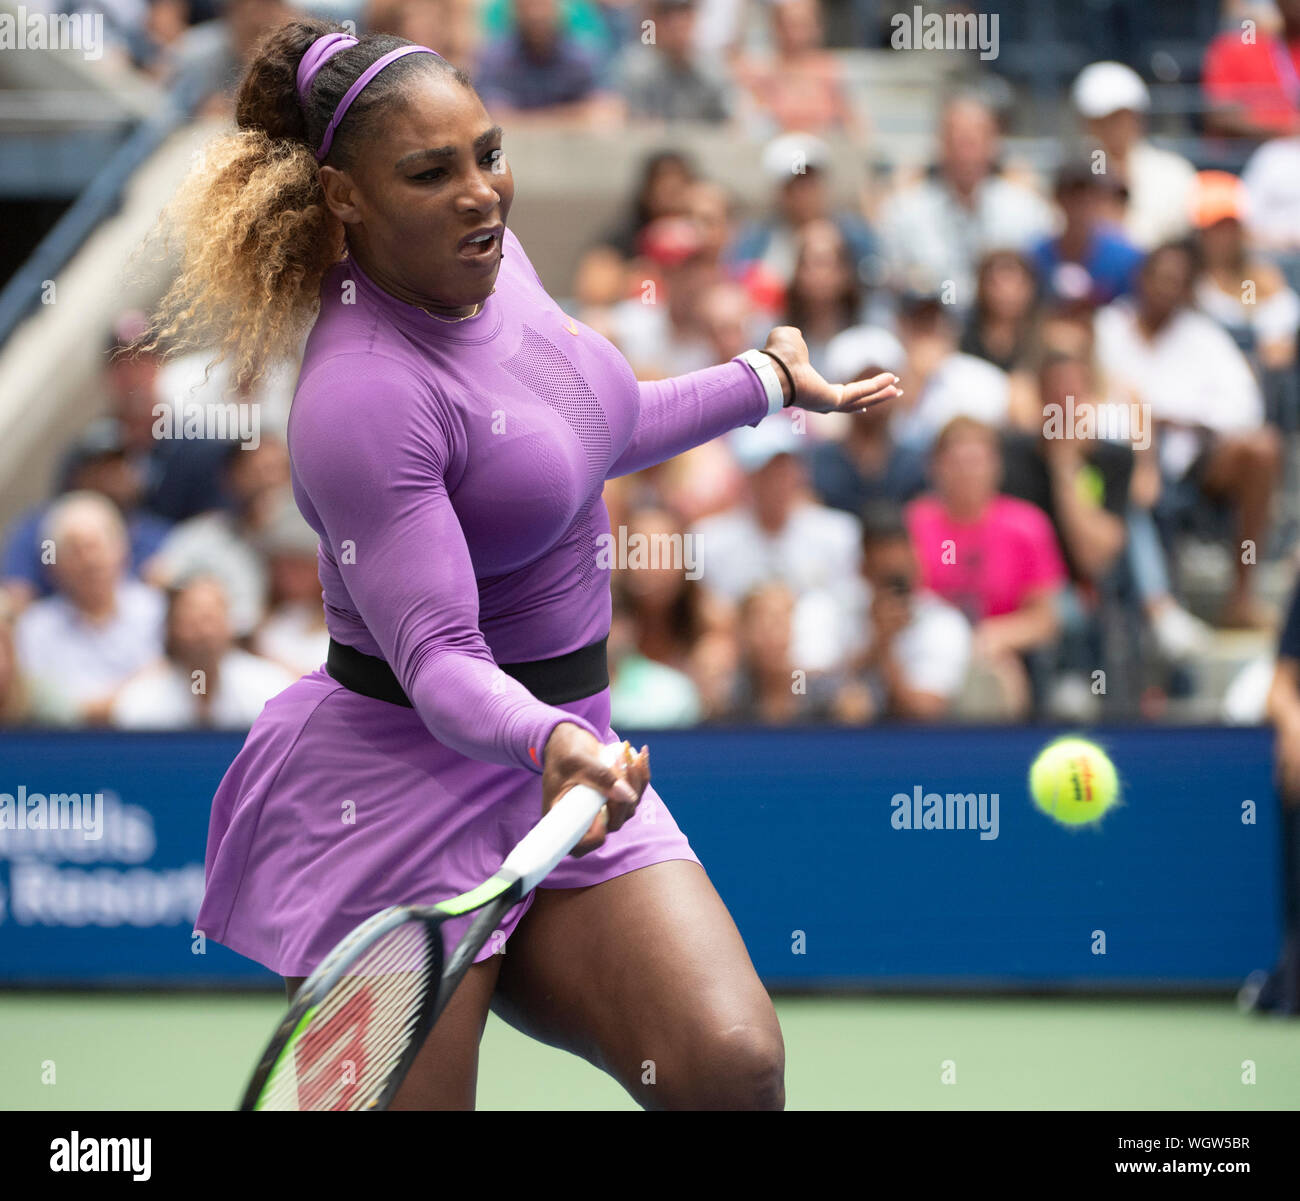 Flushing, Queens, NY, USA. 1st Sep, 2019. Serena Williams (USA) defeated Petra Martic (CRO) 6-3, 6-4, at the US Open being played at Billie Jean King National Tennis Center in Flushing, Queens, NY. © Jo Becktold/CSM/Alamy Live News Stock Photo